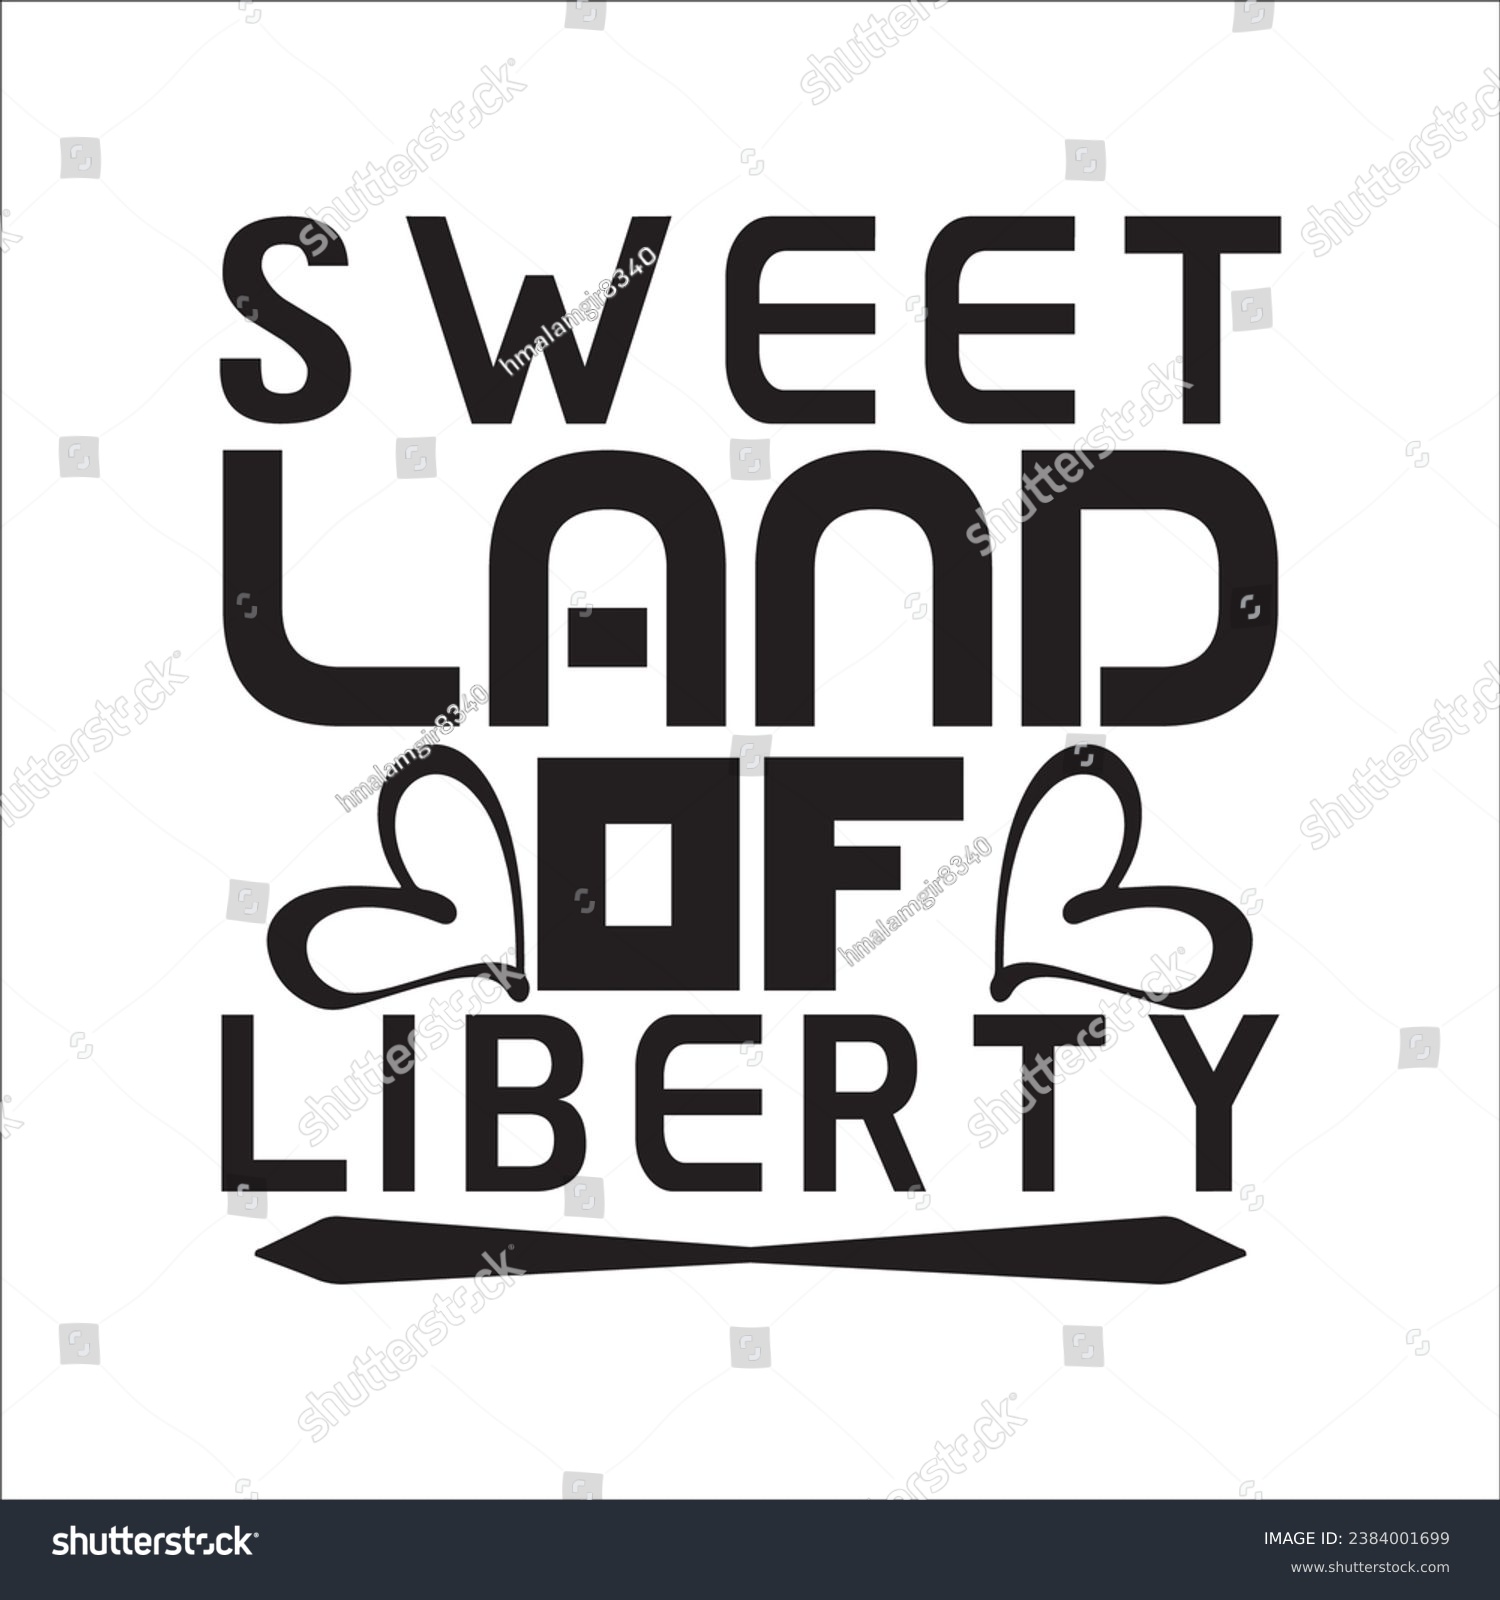 SVG of Sweet land of liberty 2 t-shirt design. Here You Can find and Buy t-Shirt Design. Digital Files for yourself, friends and family, or anyone who supports your Special Day and Occasions. svg